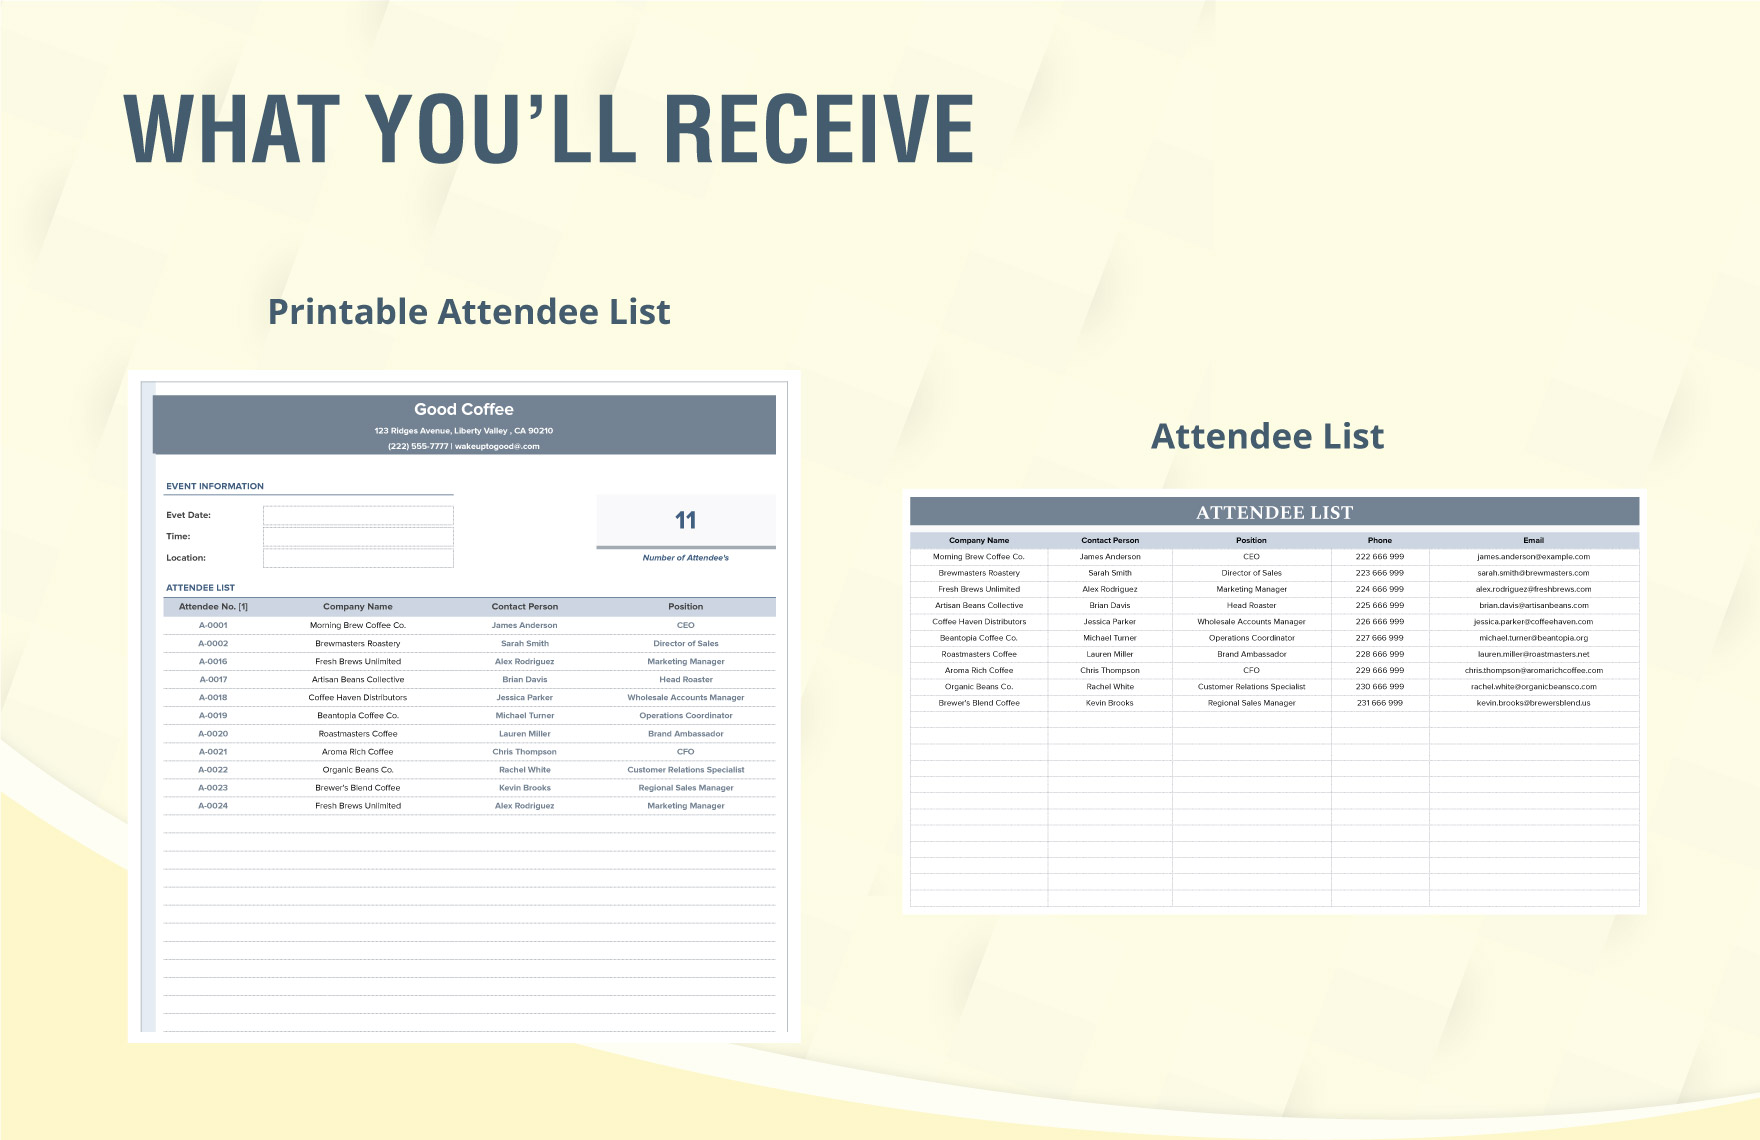 Sales Networking Event Attendee List Template